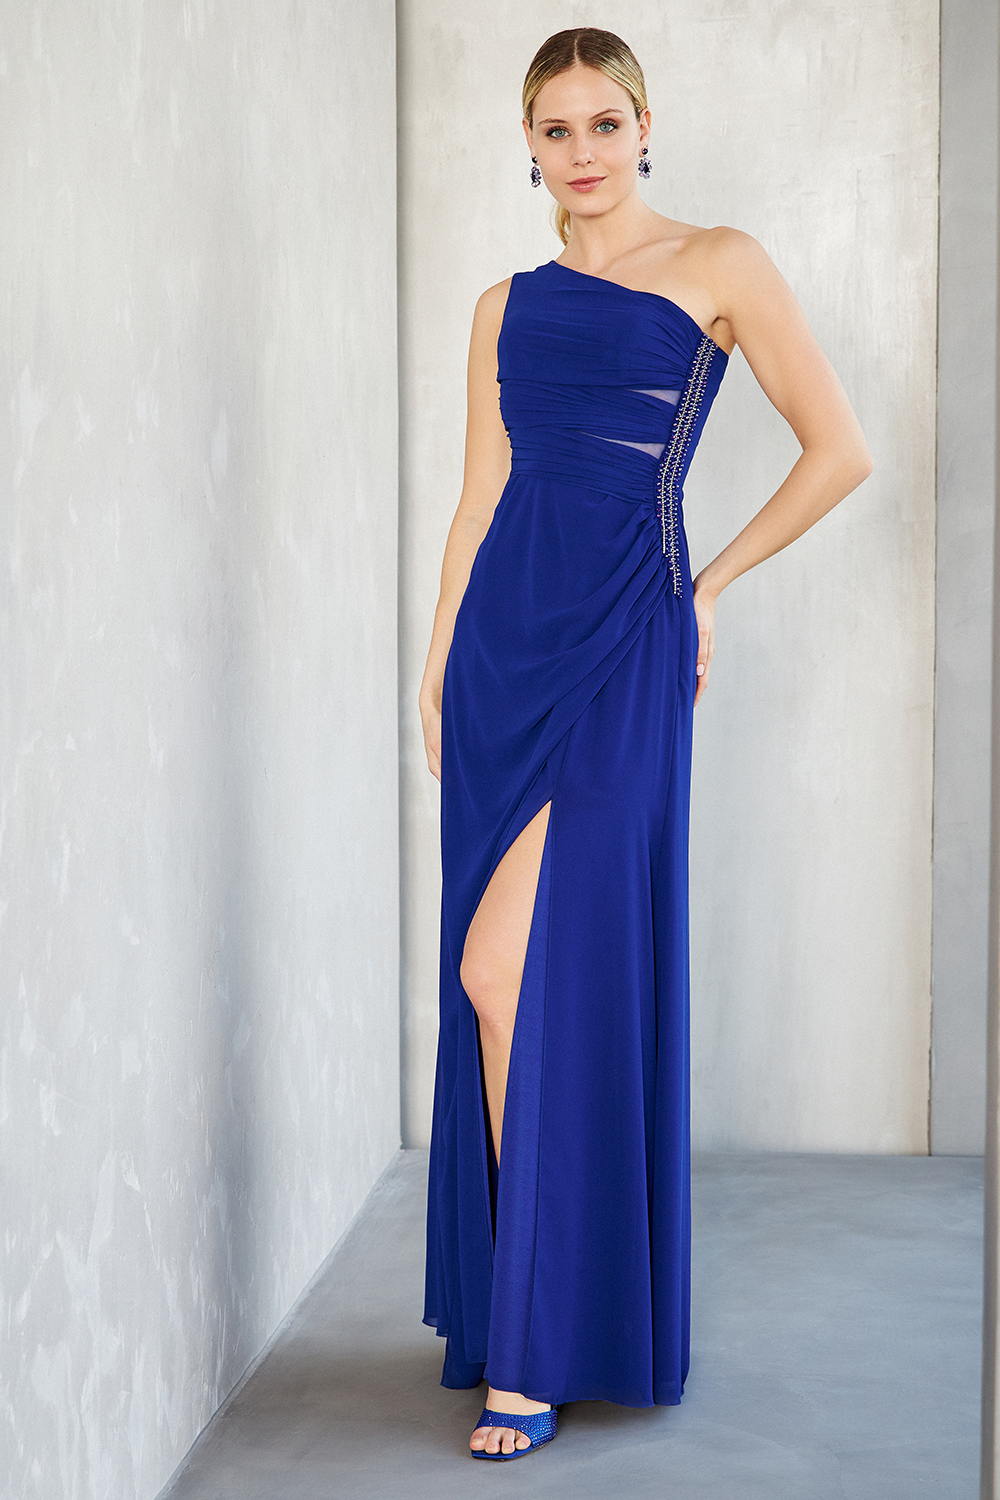 Evening Dresses / One shoulder long evening dress with chiffon fabric and beading